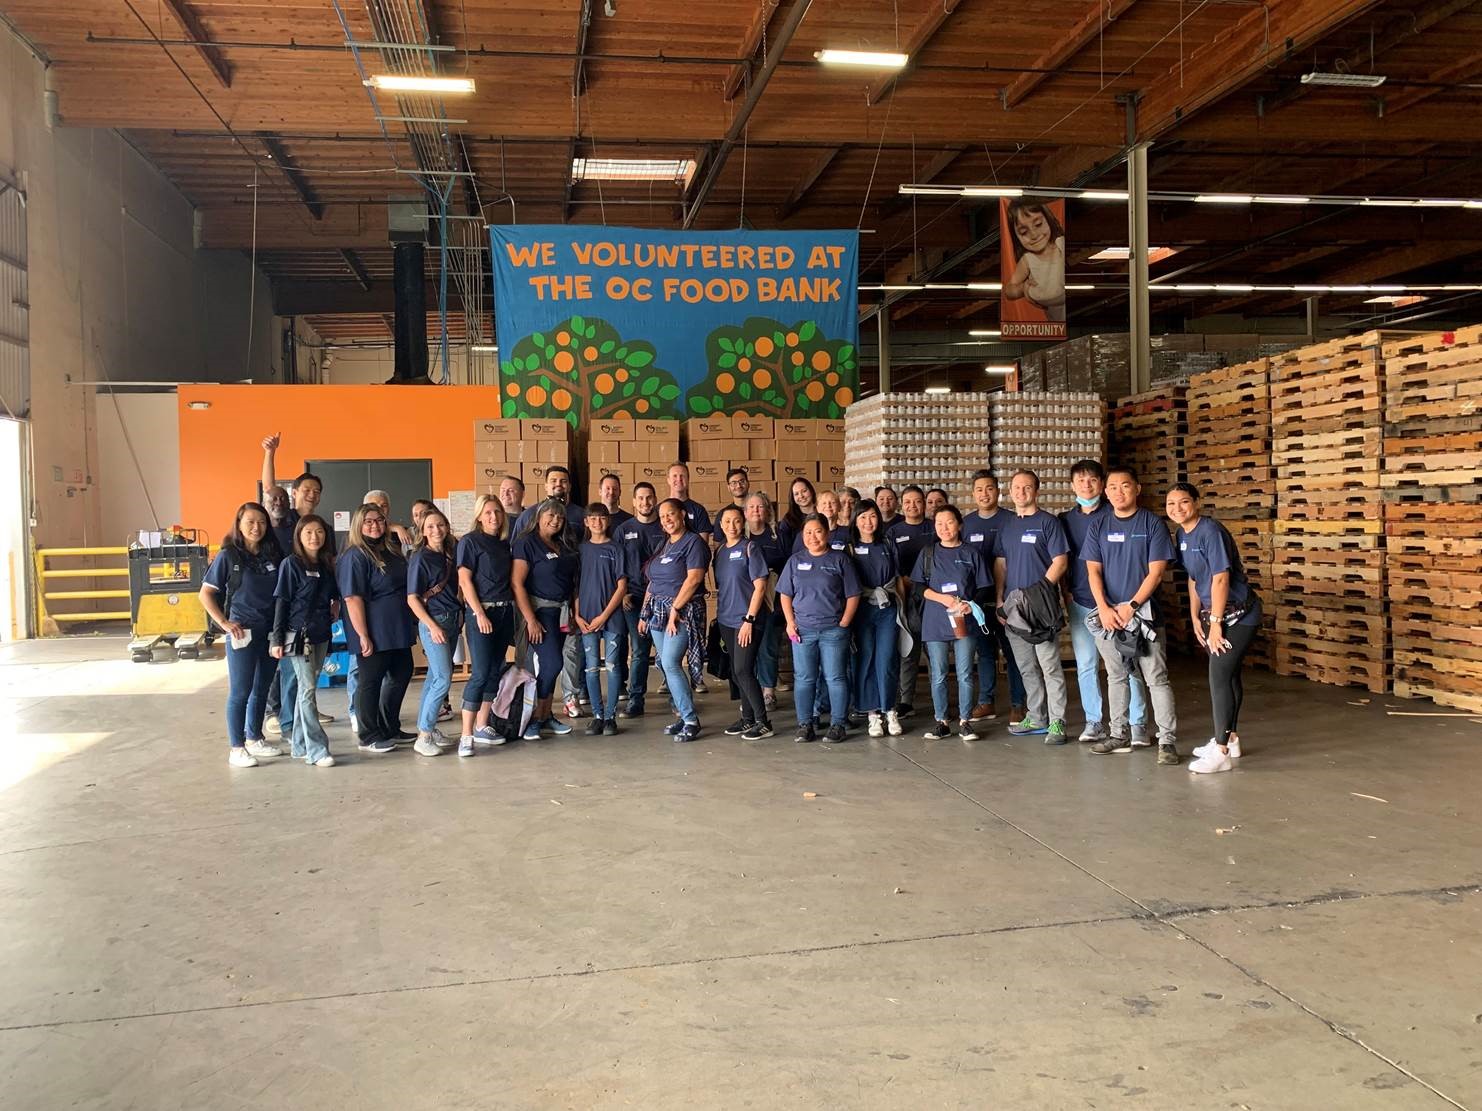 Group shot of agilon employees at a food bank.